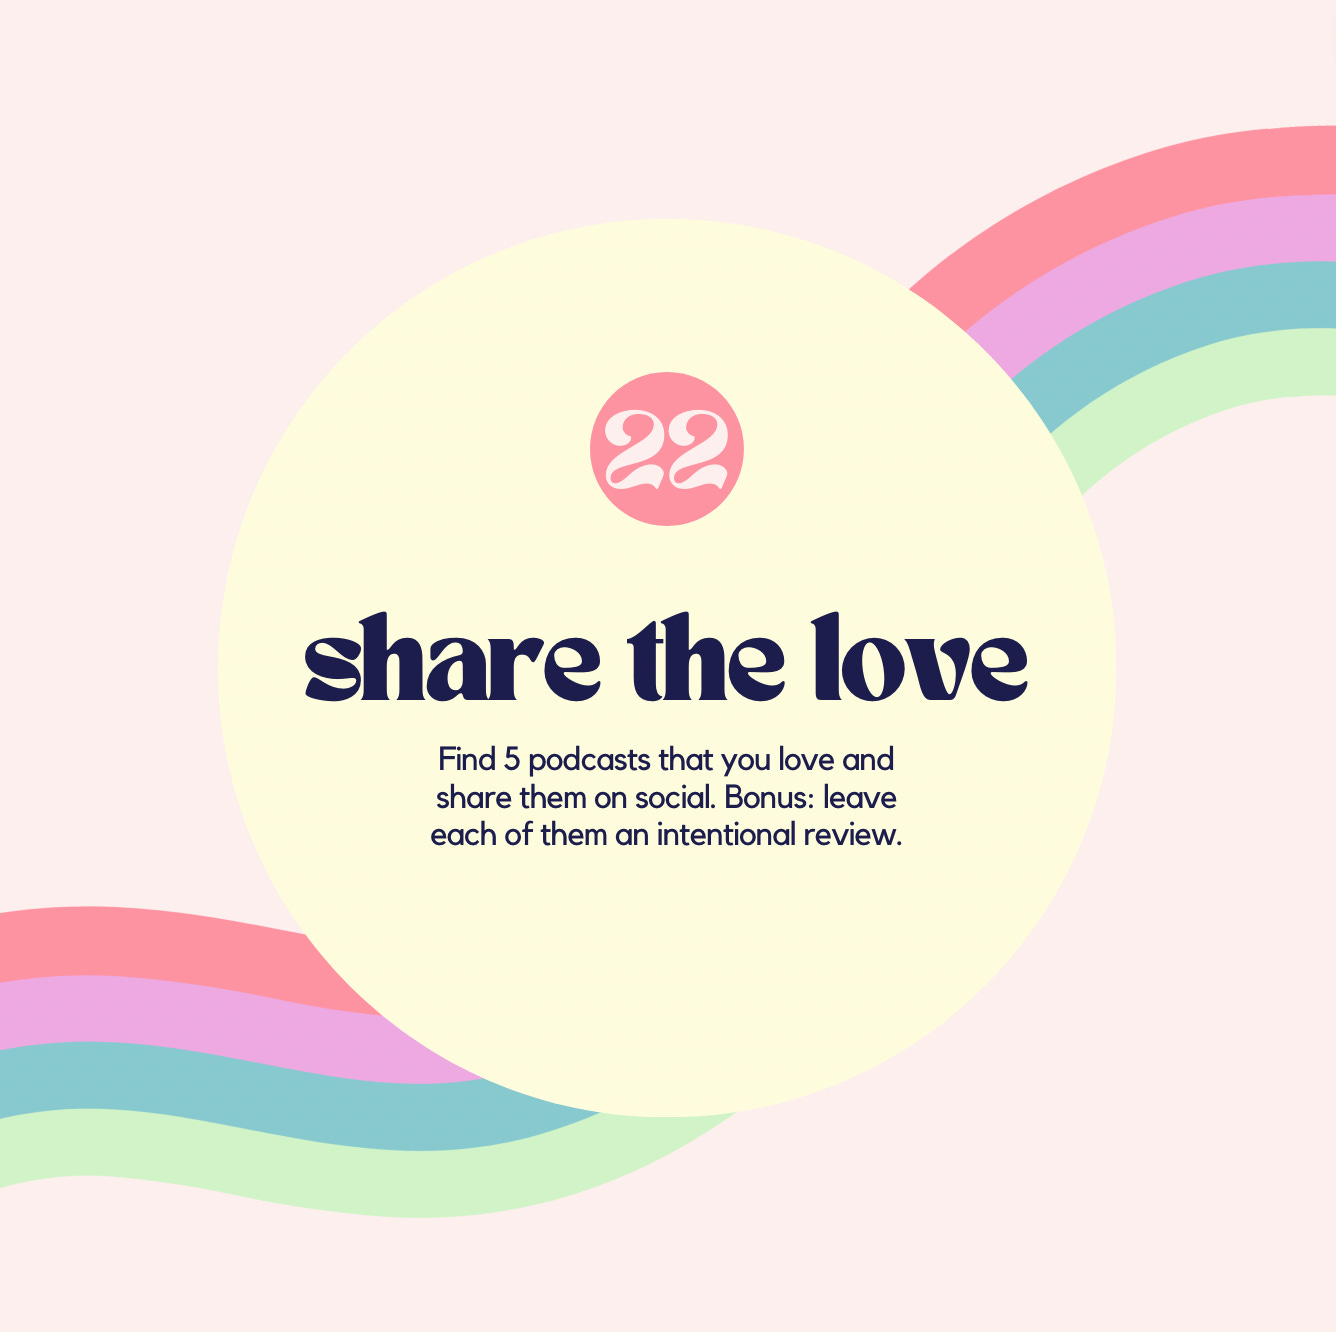 #22. Share the love. Find 5 podcasts that you love and share them on social. Bonus: leave each of them an intentional review.